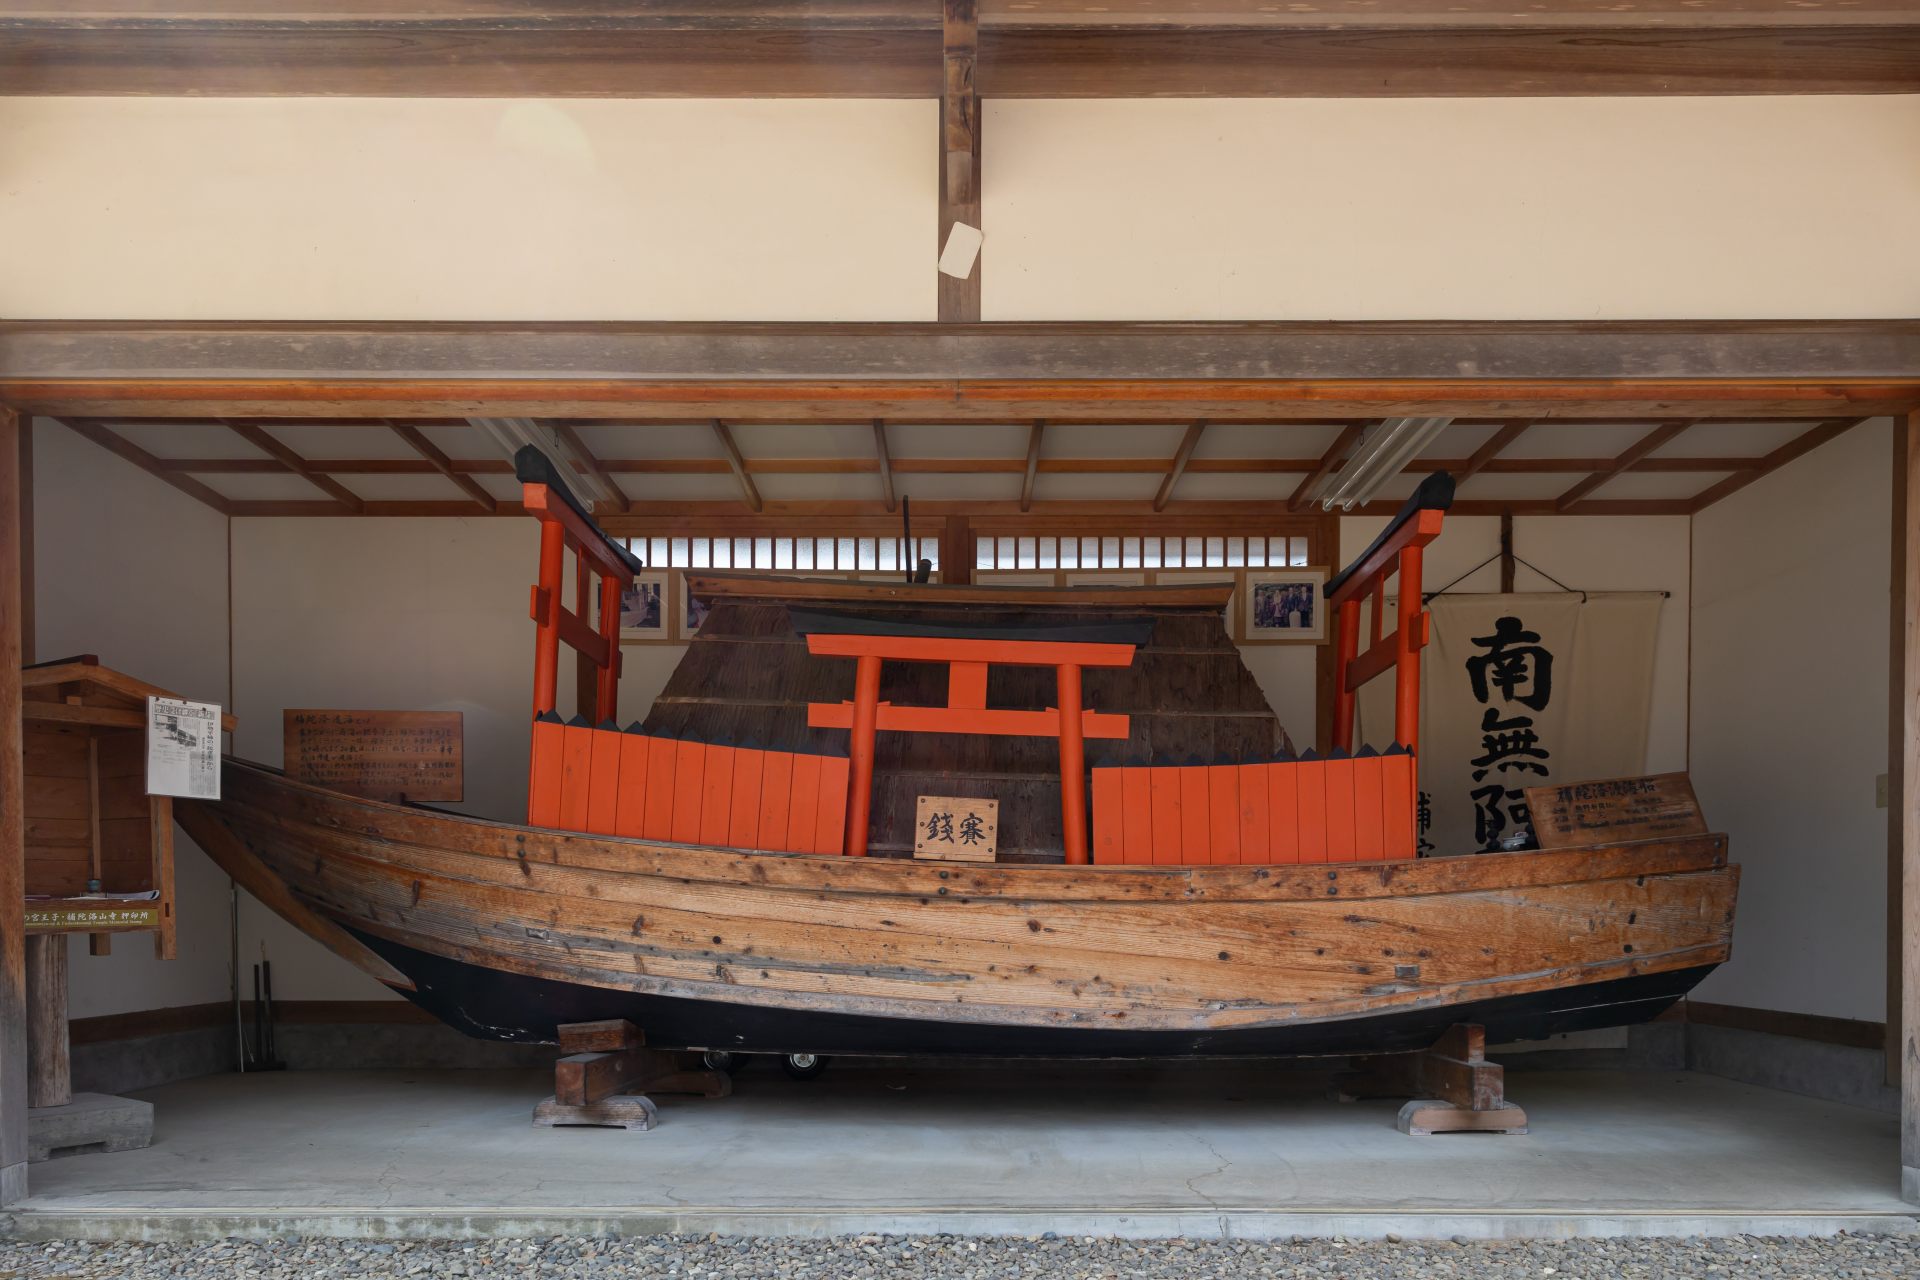 Boats like this were used by the faithful to "cross the sea" to Mt. Fudaraku (Kannon’s Southern Pure Land Paradise) in a form of ritual martyrdom.